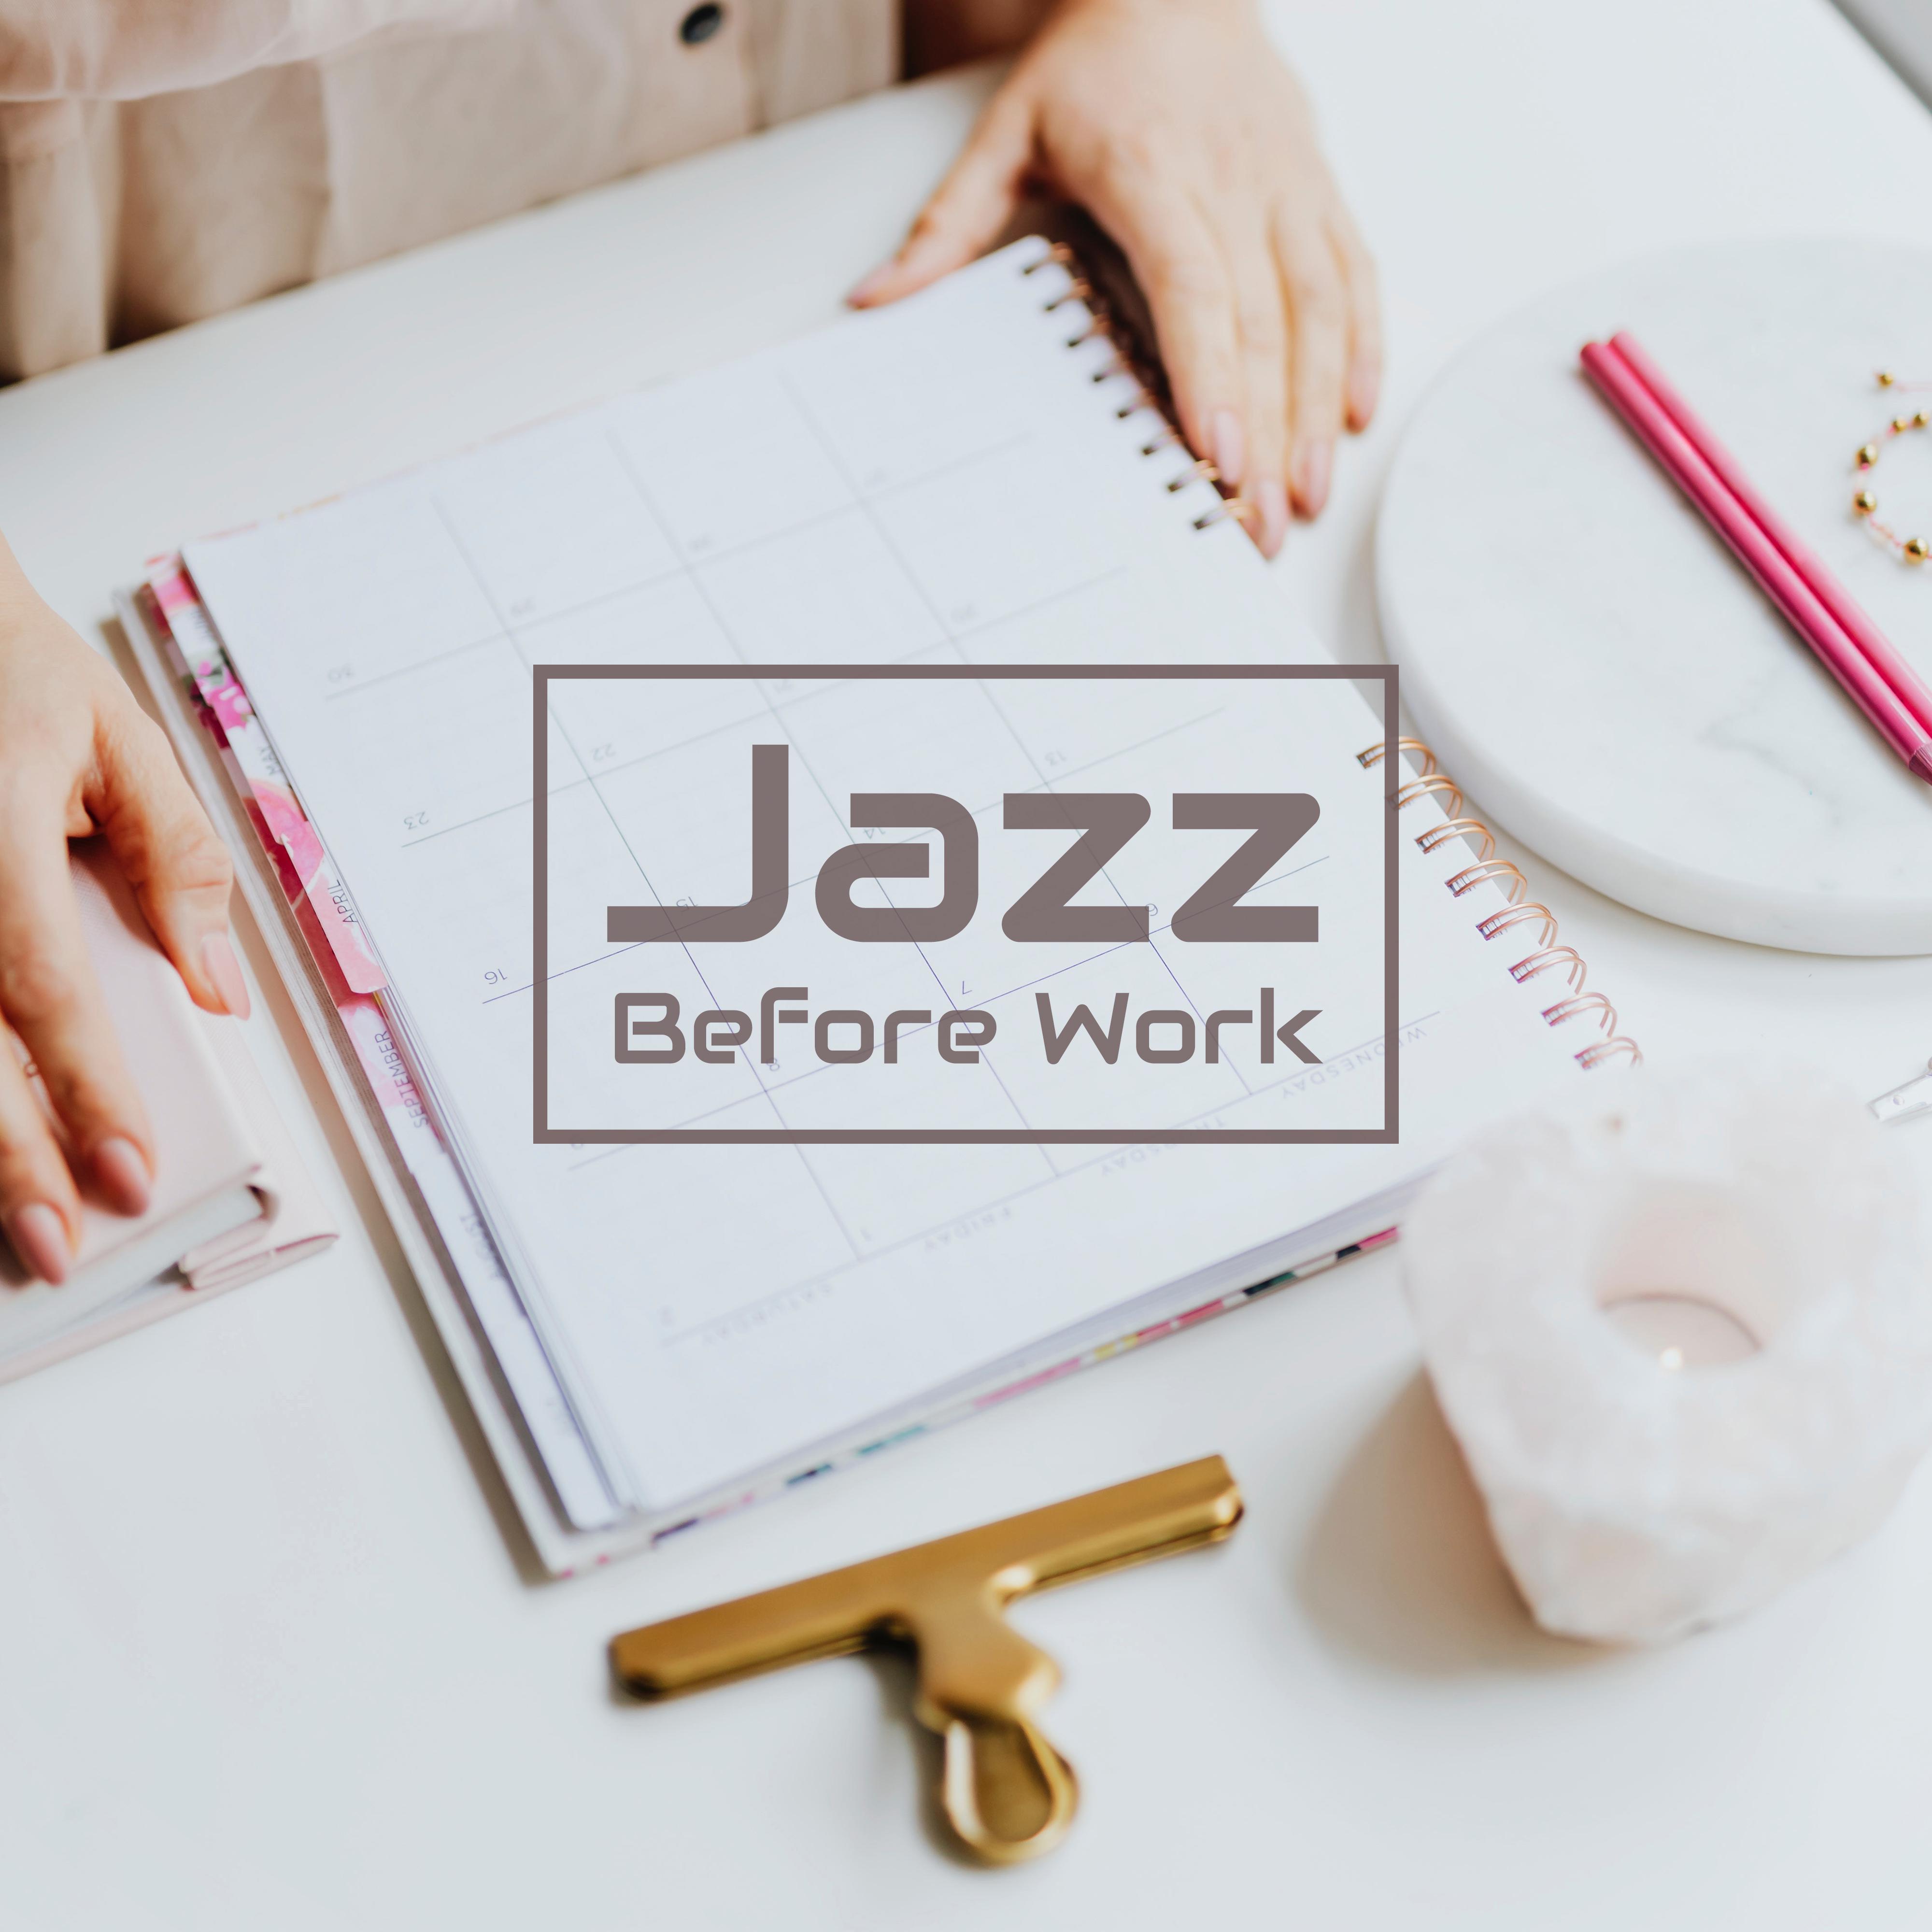 Jazz Before Work: Music to De-Stress and relax before Work, Study and Daily Duties